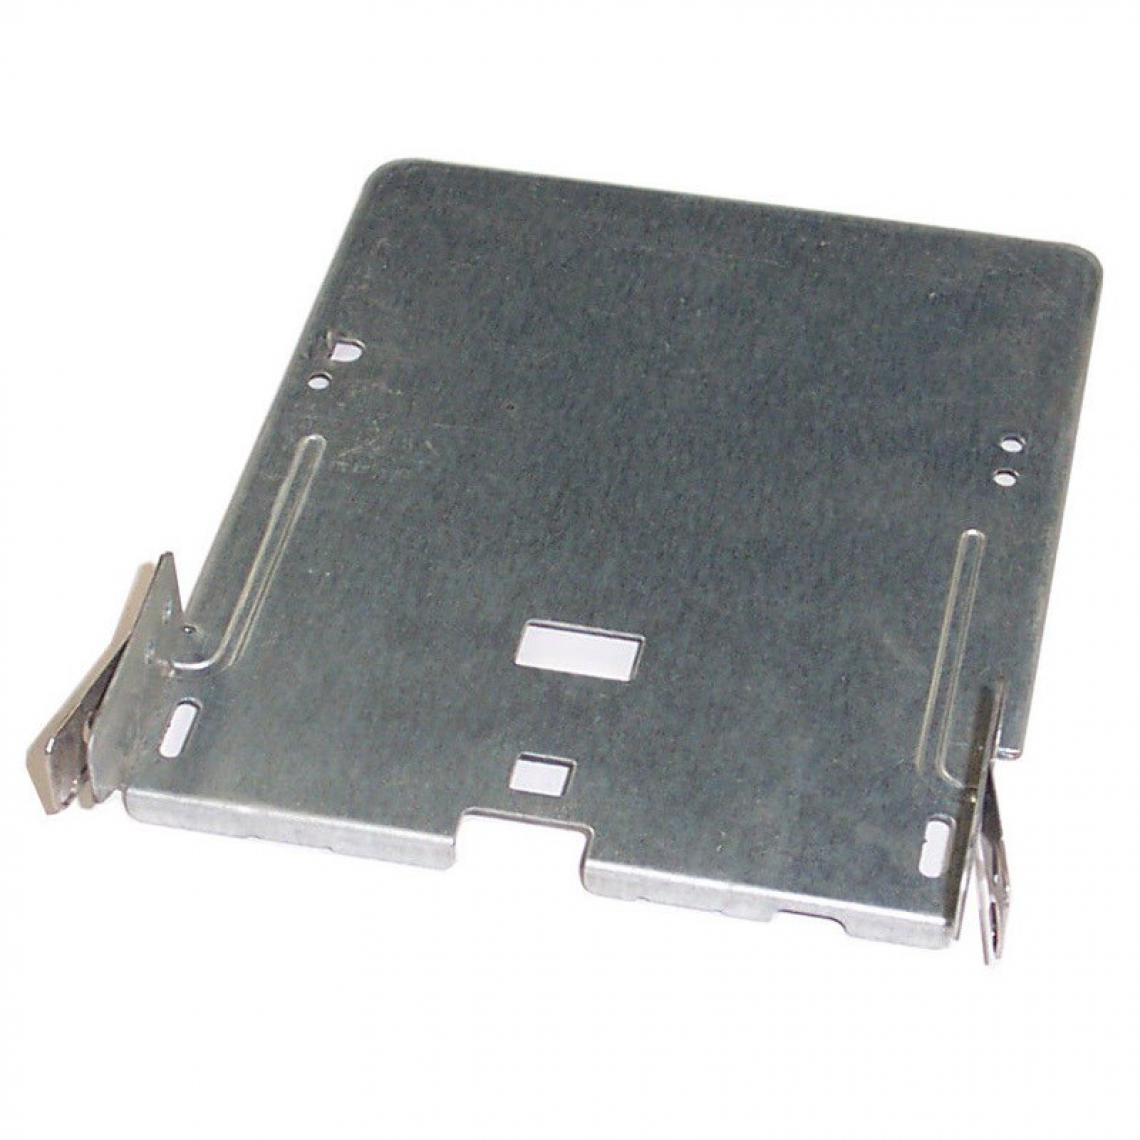 Dell - Rack Lecteur Disquette Dell 1800 1900 2900 FBS56030017 PowerEdge Floppy Disk Tray - Rack amovible